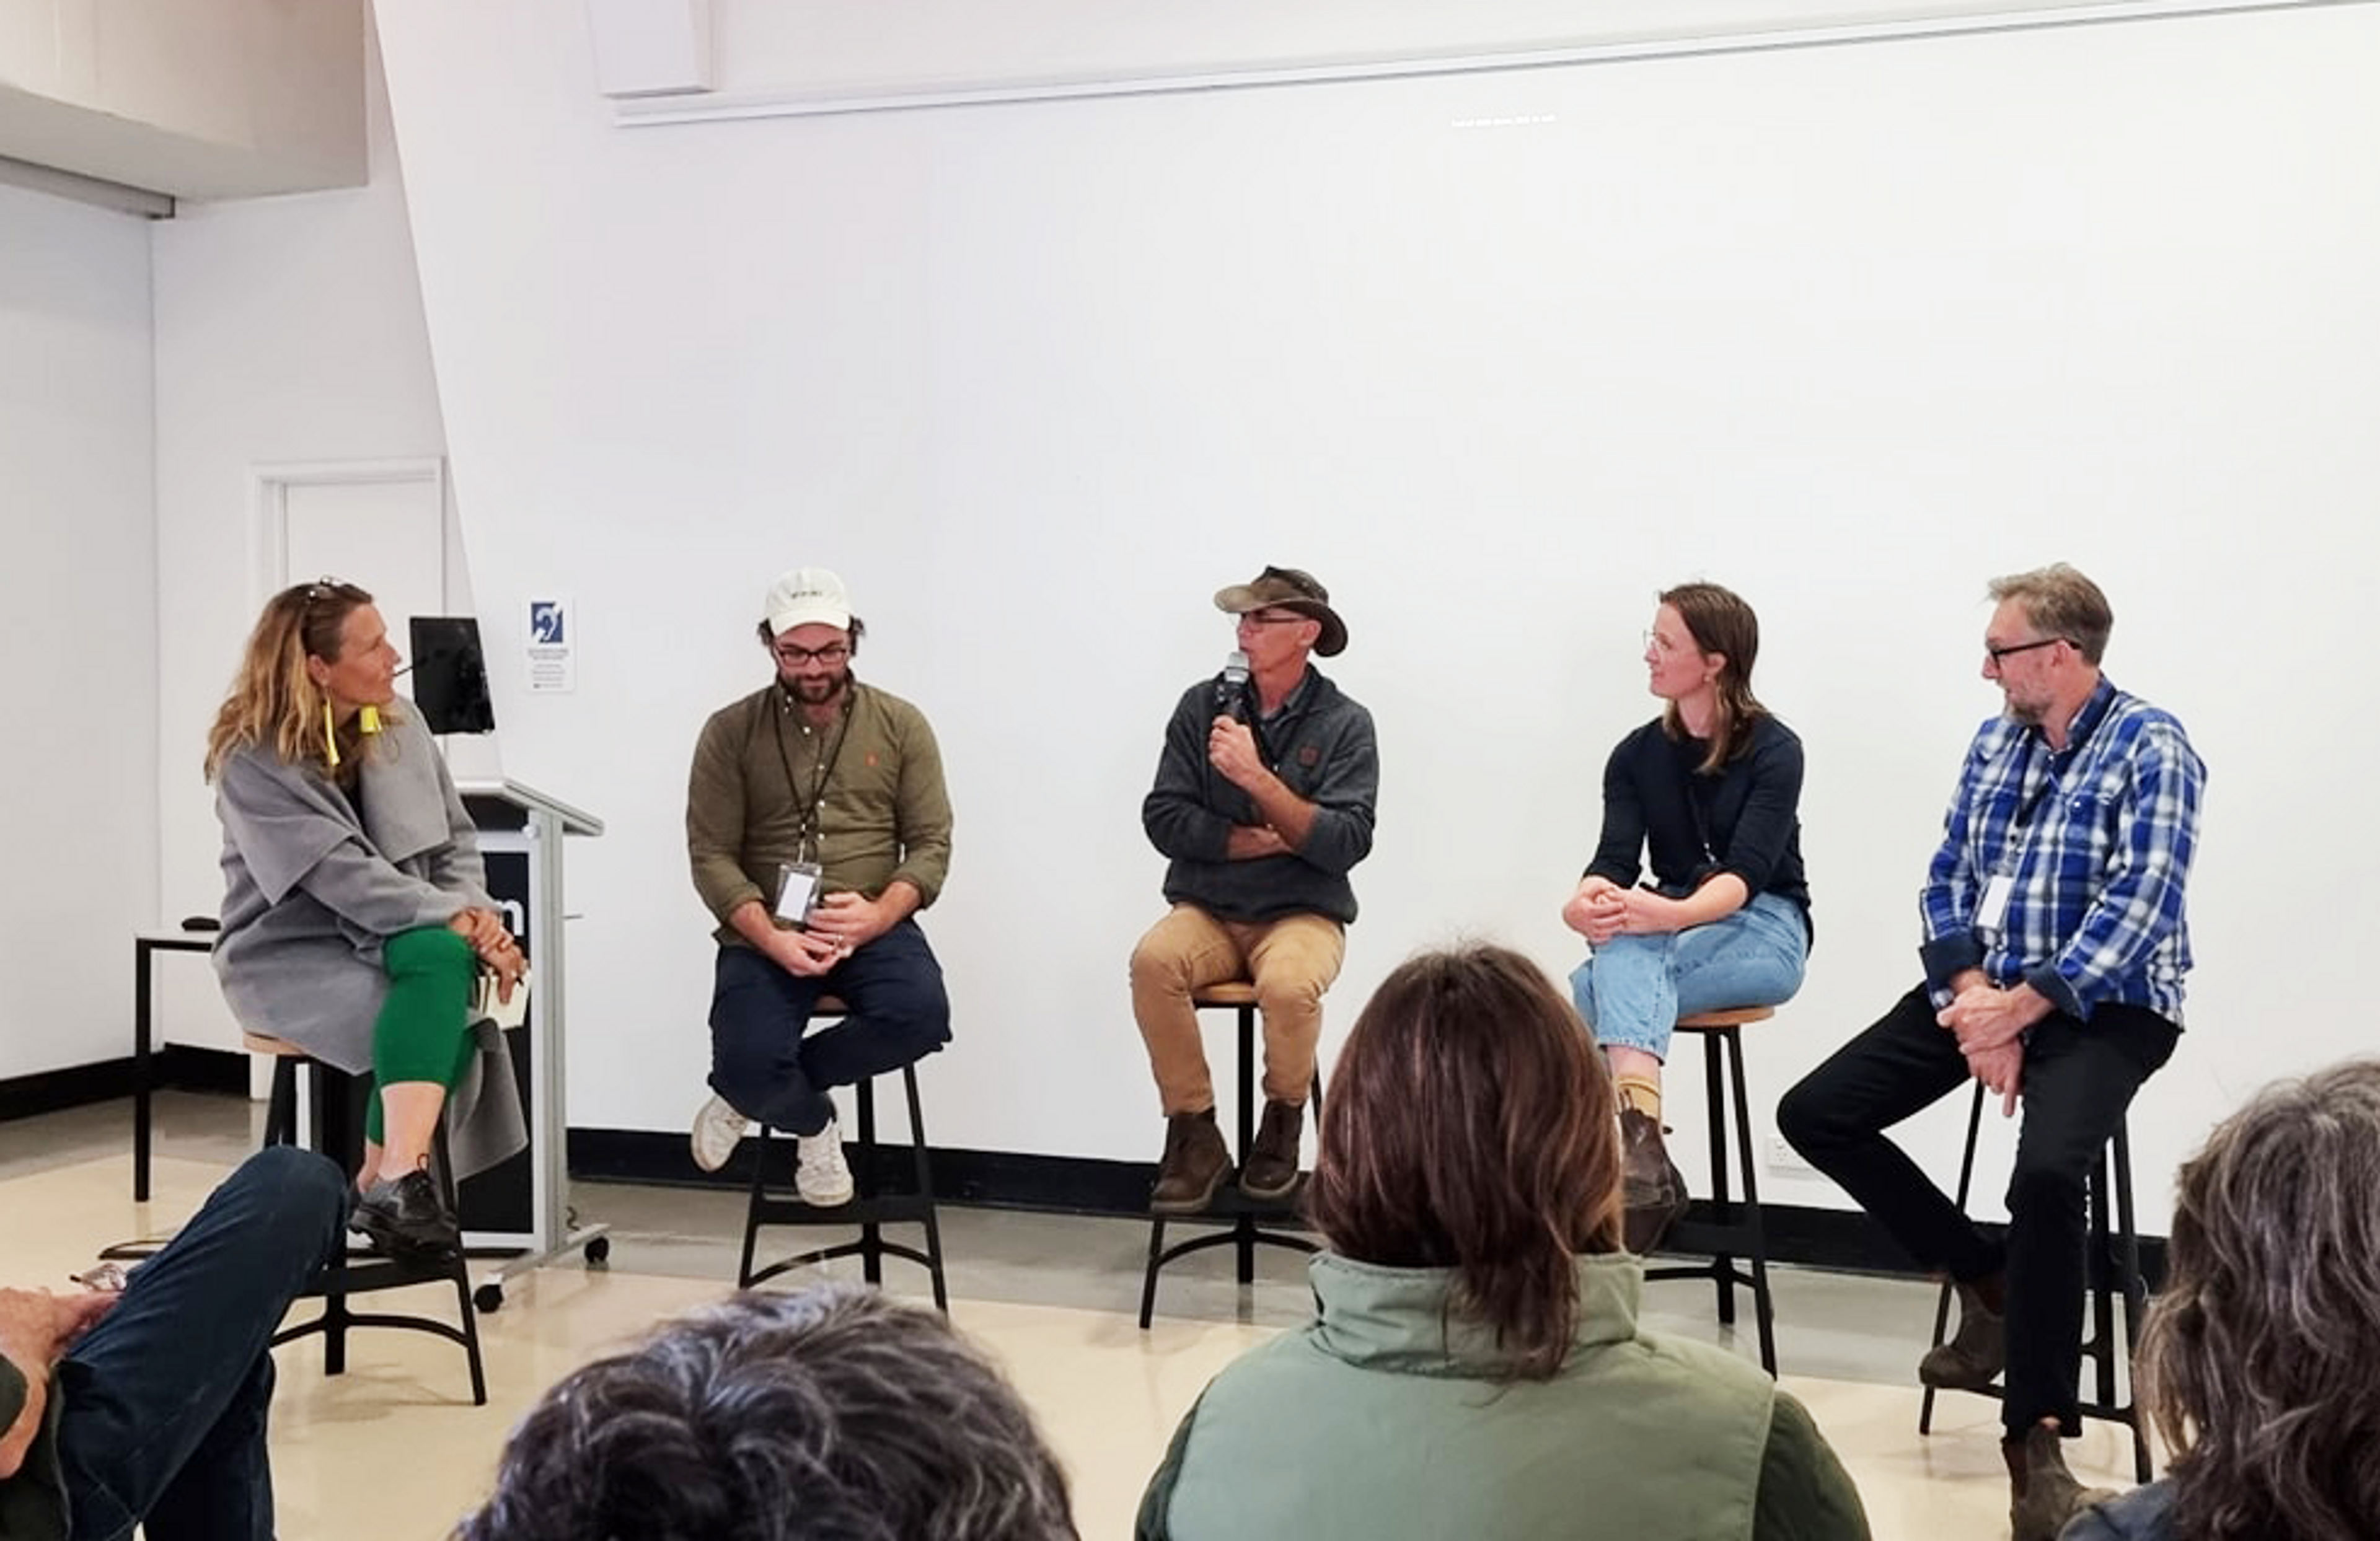 Five people sitting on stools in a white room talking about regenerative agriculture